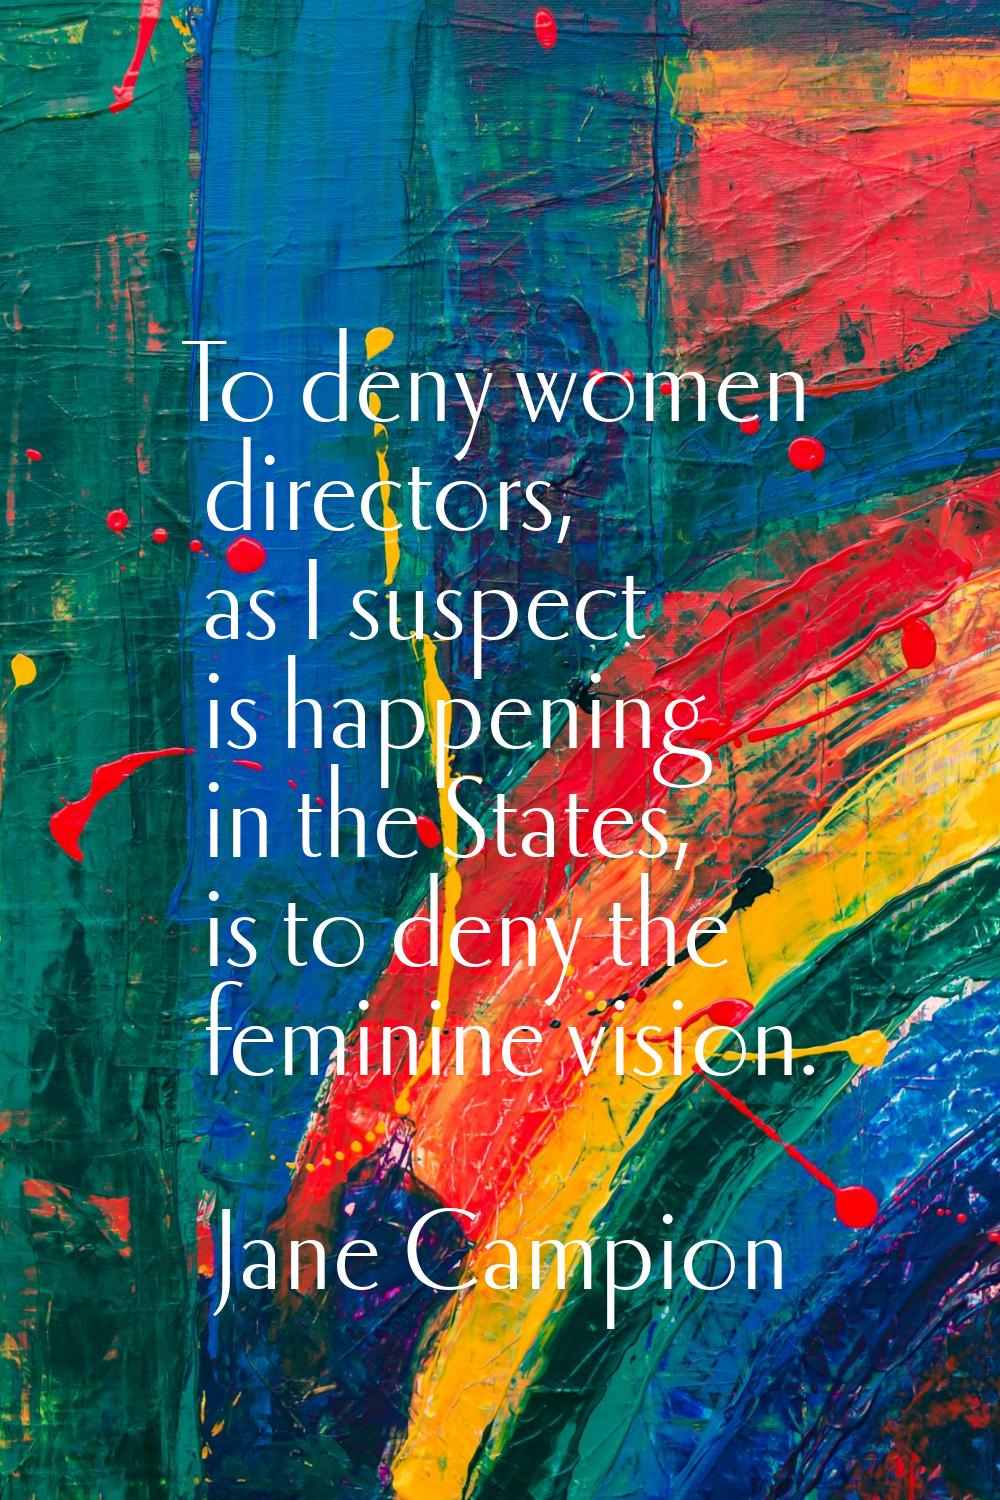 To deny women directors, as I suspect is happening in the States, is to deny the feminine vision.